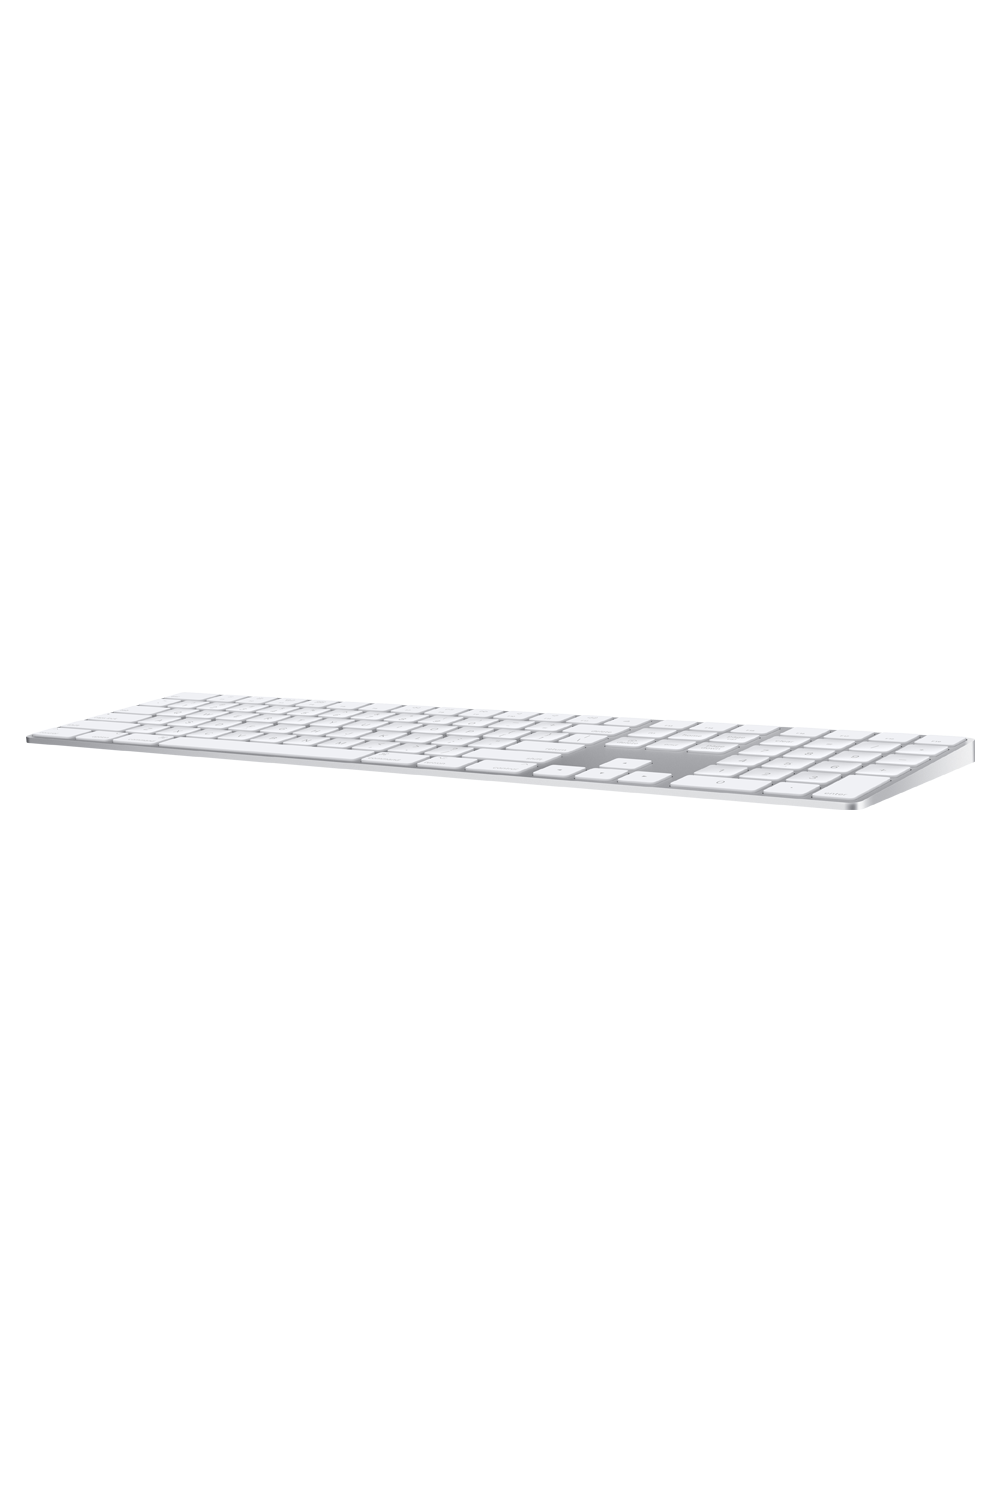 Apple Magic Keyboard with Numeric Keypad | US English | Silver | Space Grey - QuickTech.in